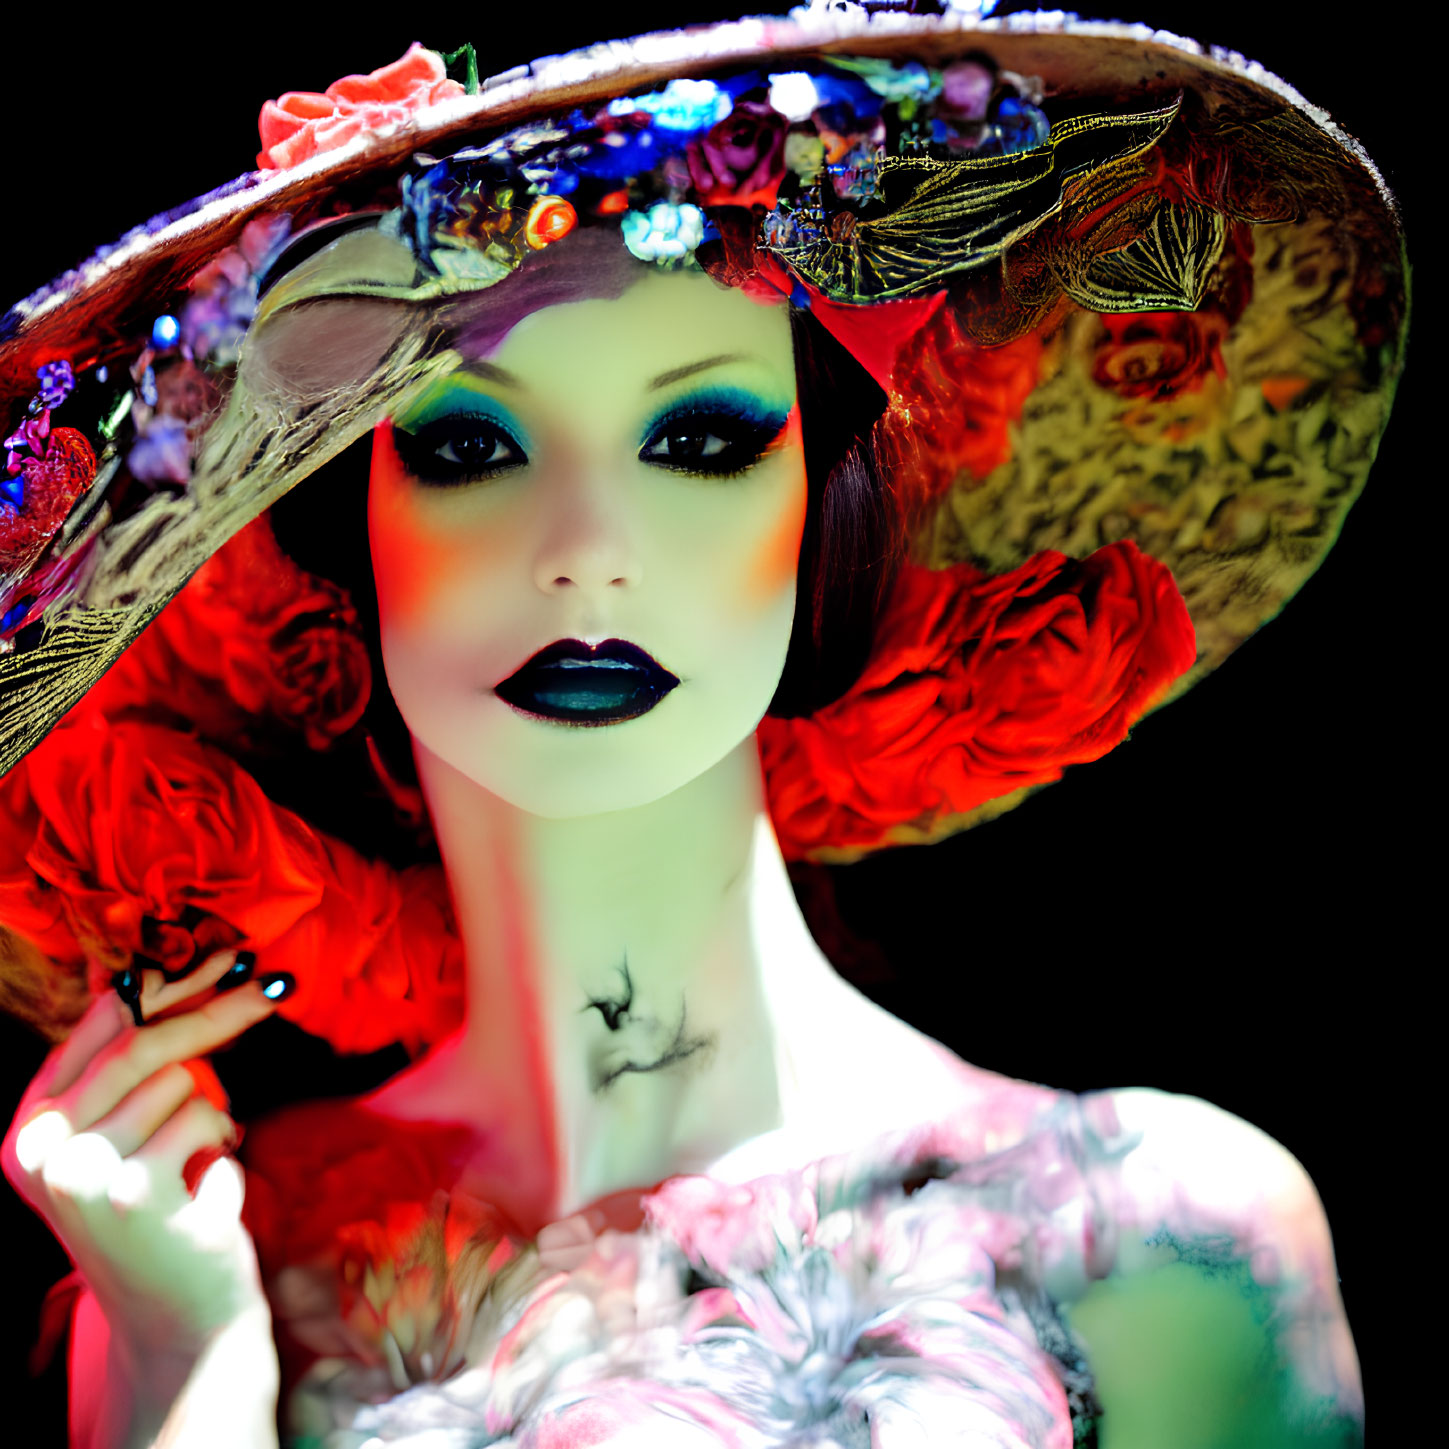 Colorful portrait of a woman with dramatic makeup and floral hat